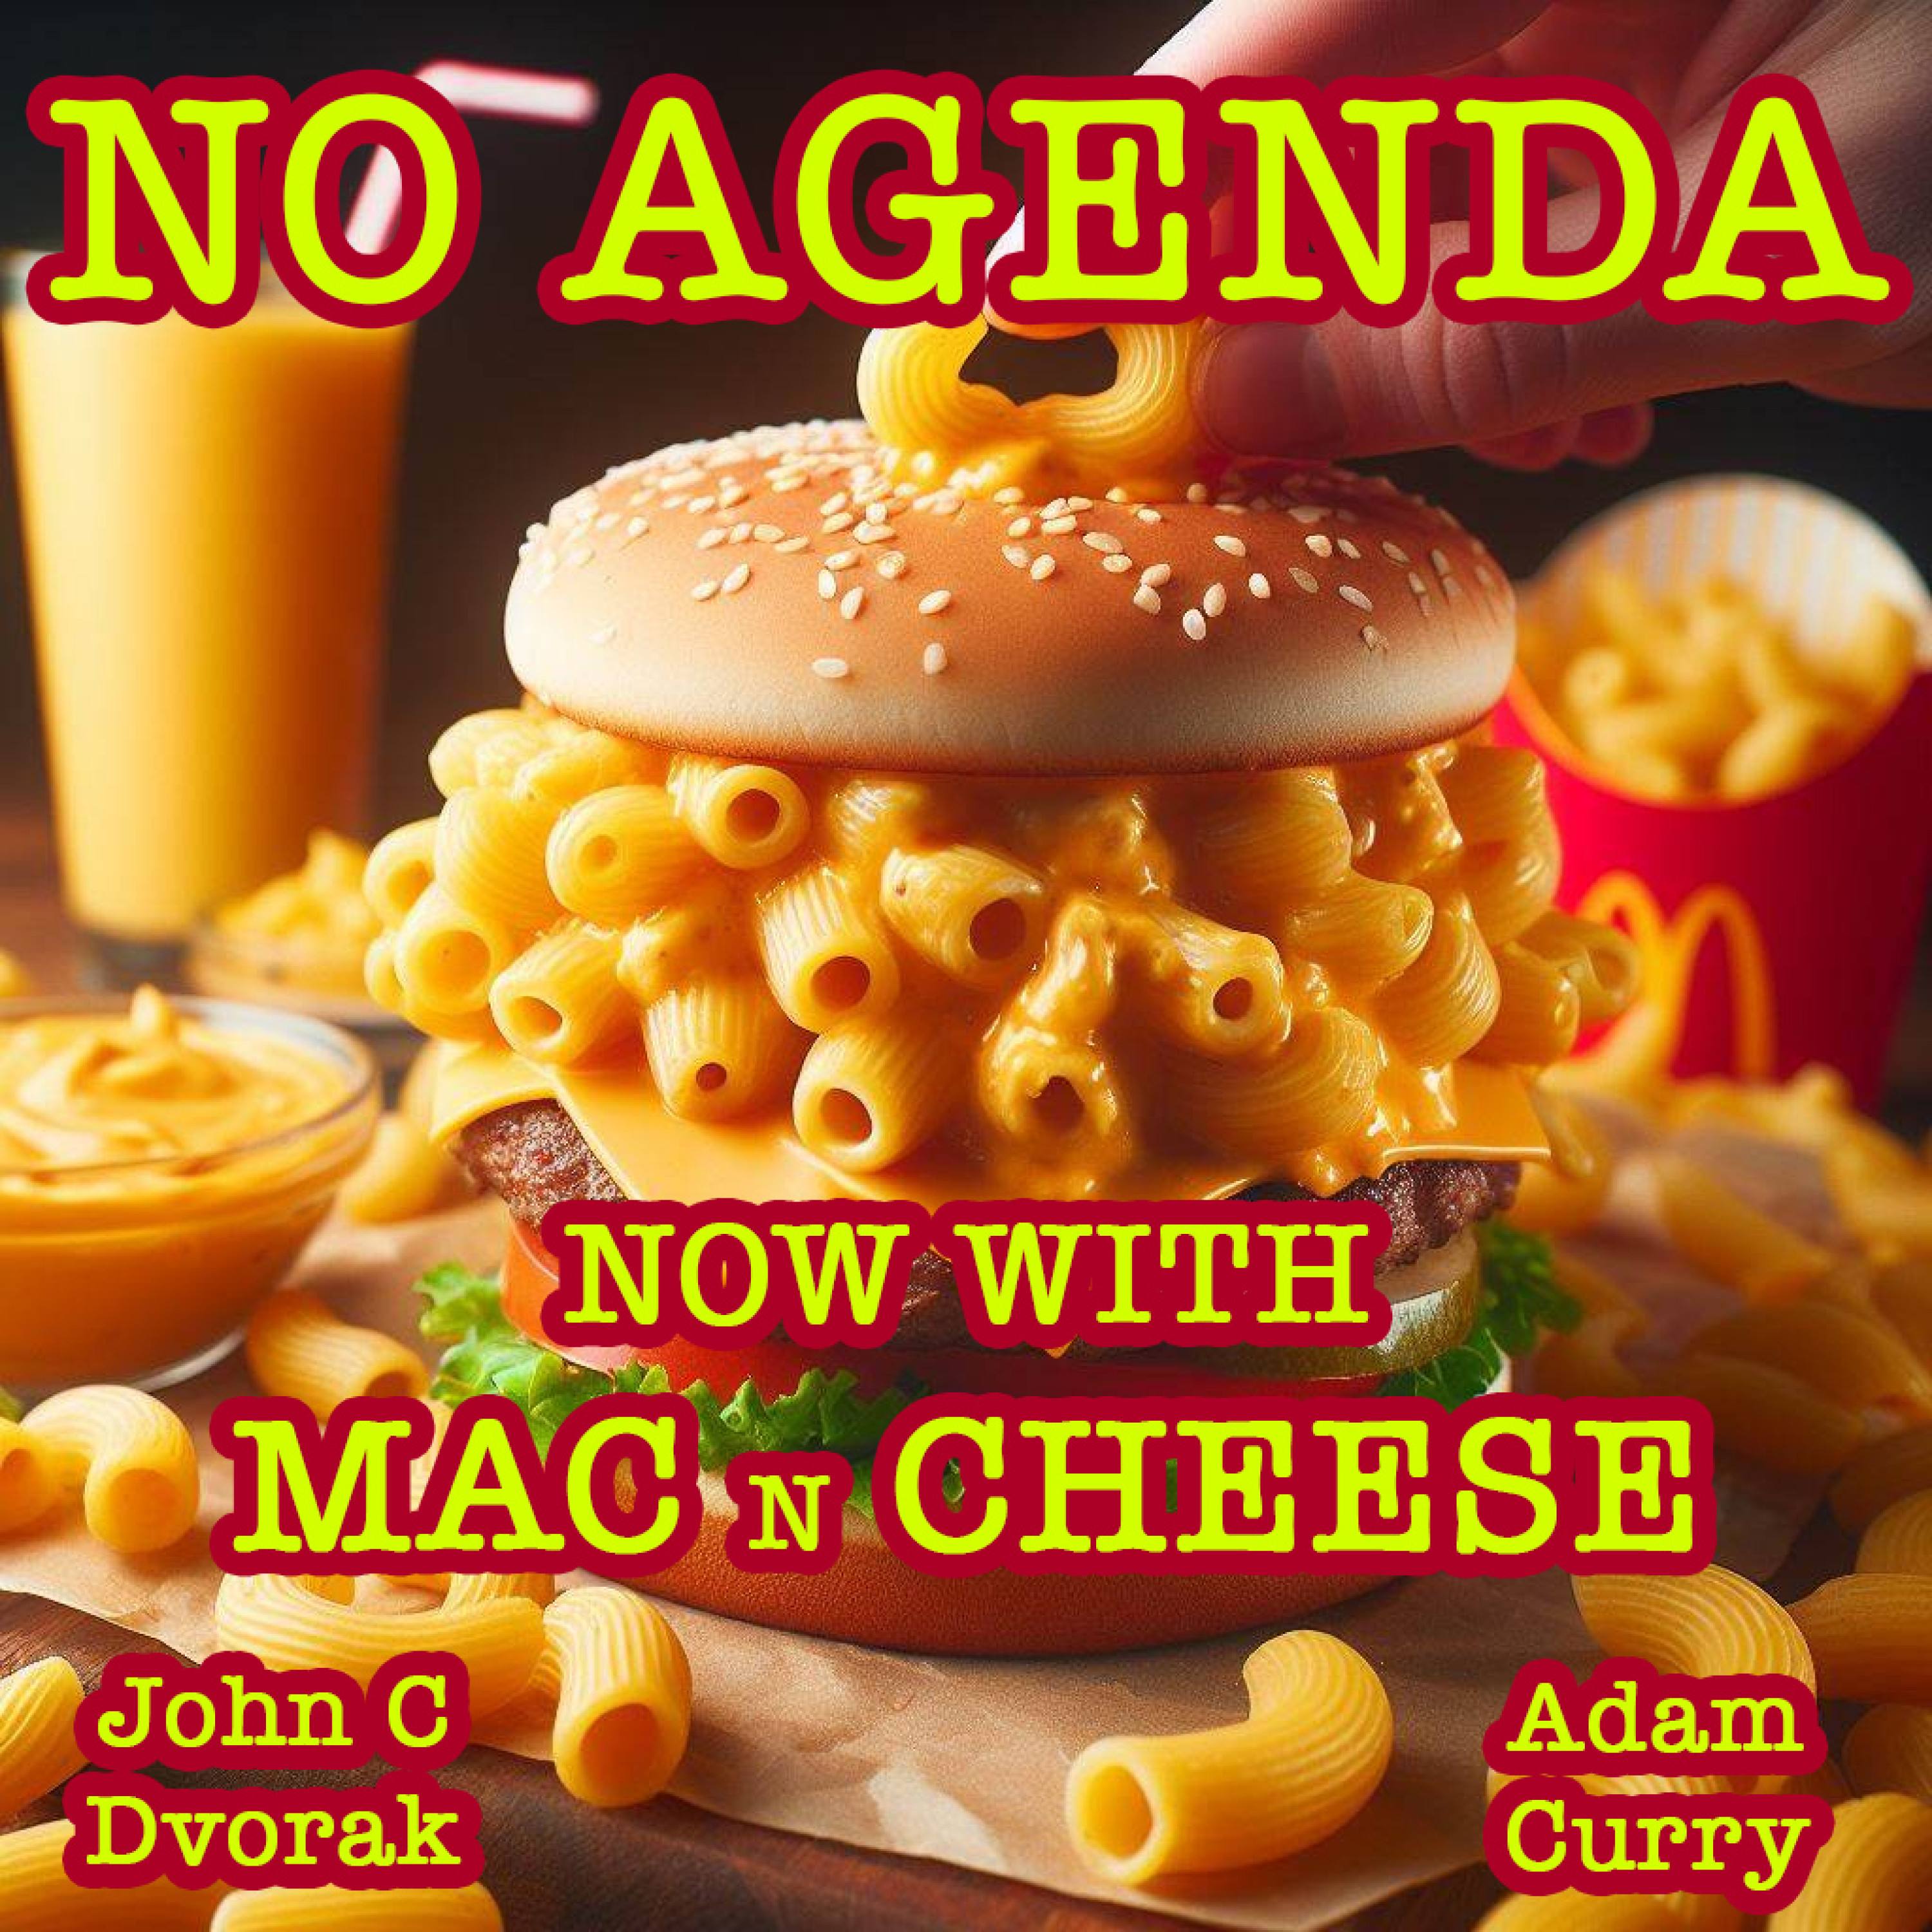 McMacnCheese by VHSRewind for 